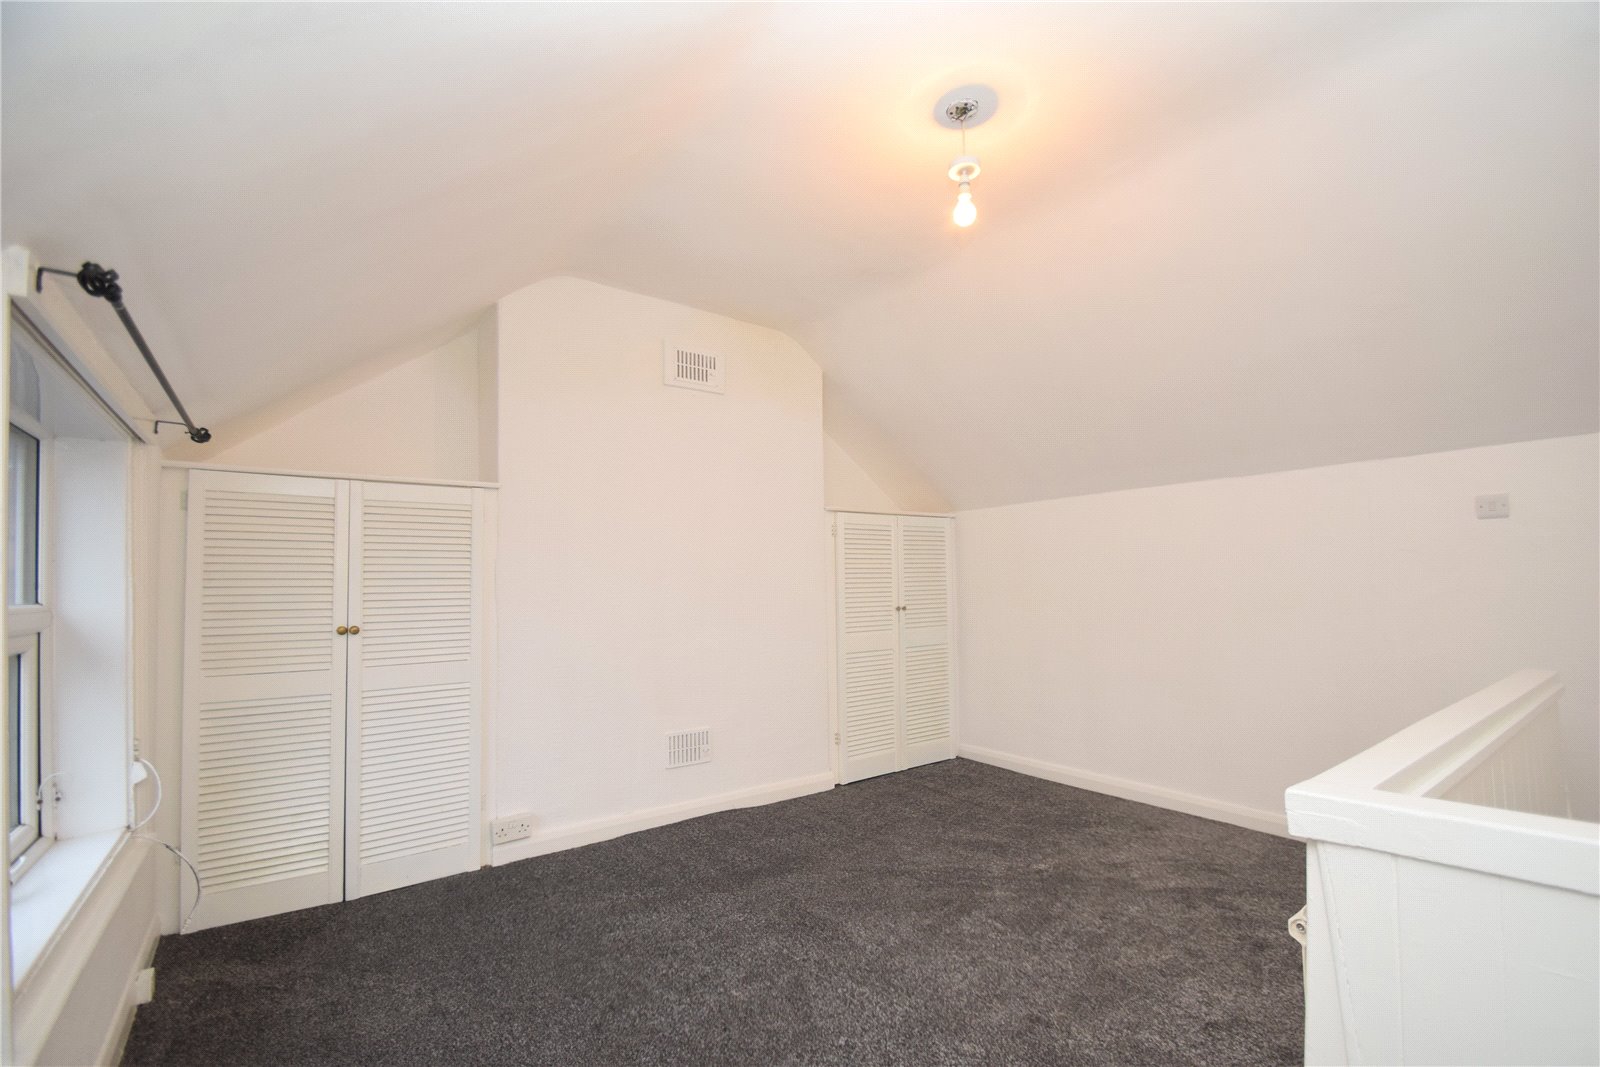 2 bed house for sale in Trafalgar Terrace, Scarborough  - Property Image 6